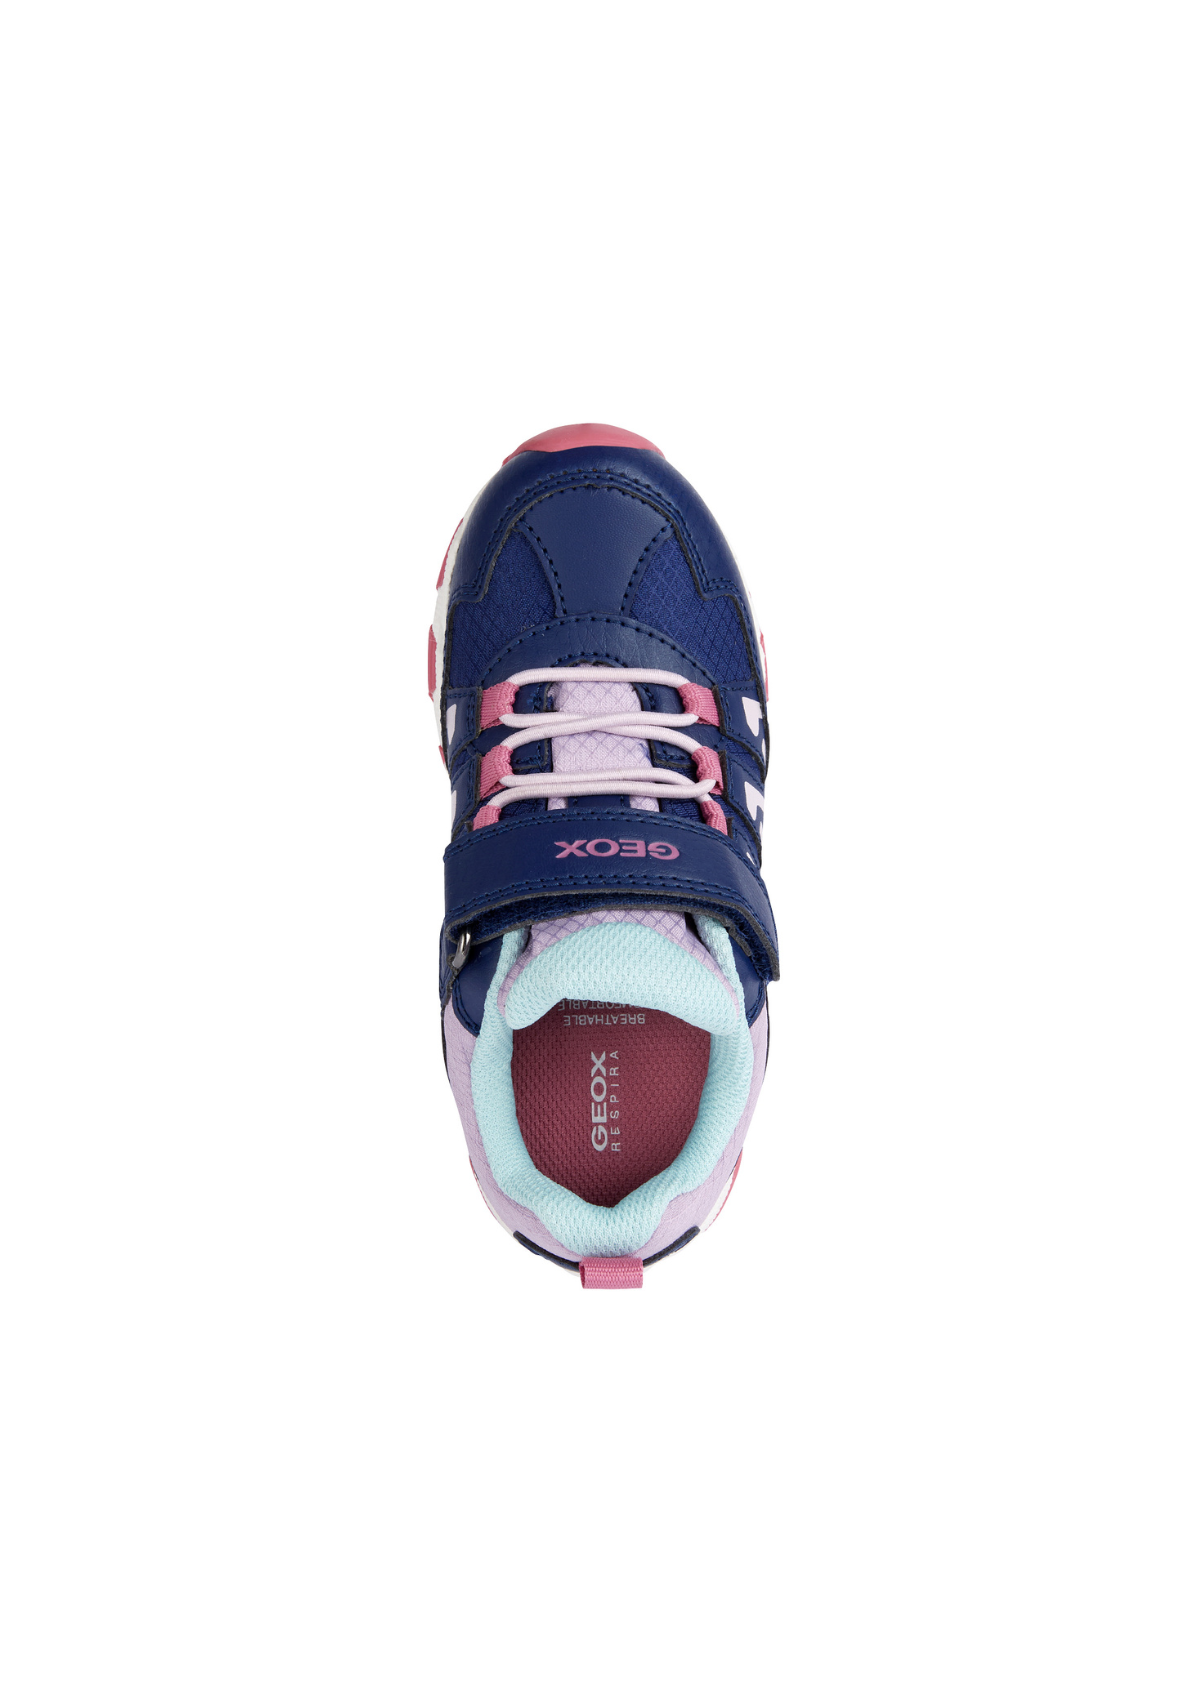 Geox Girls Trainers Magnetar Abx Navy Lilac